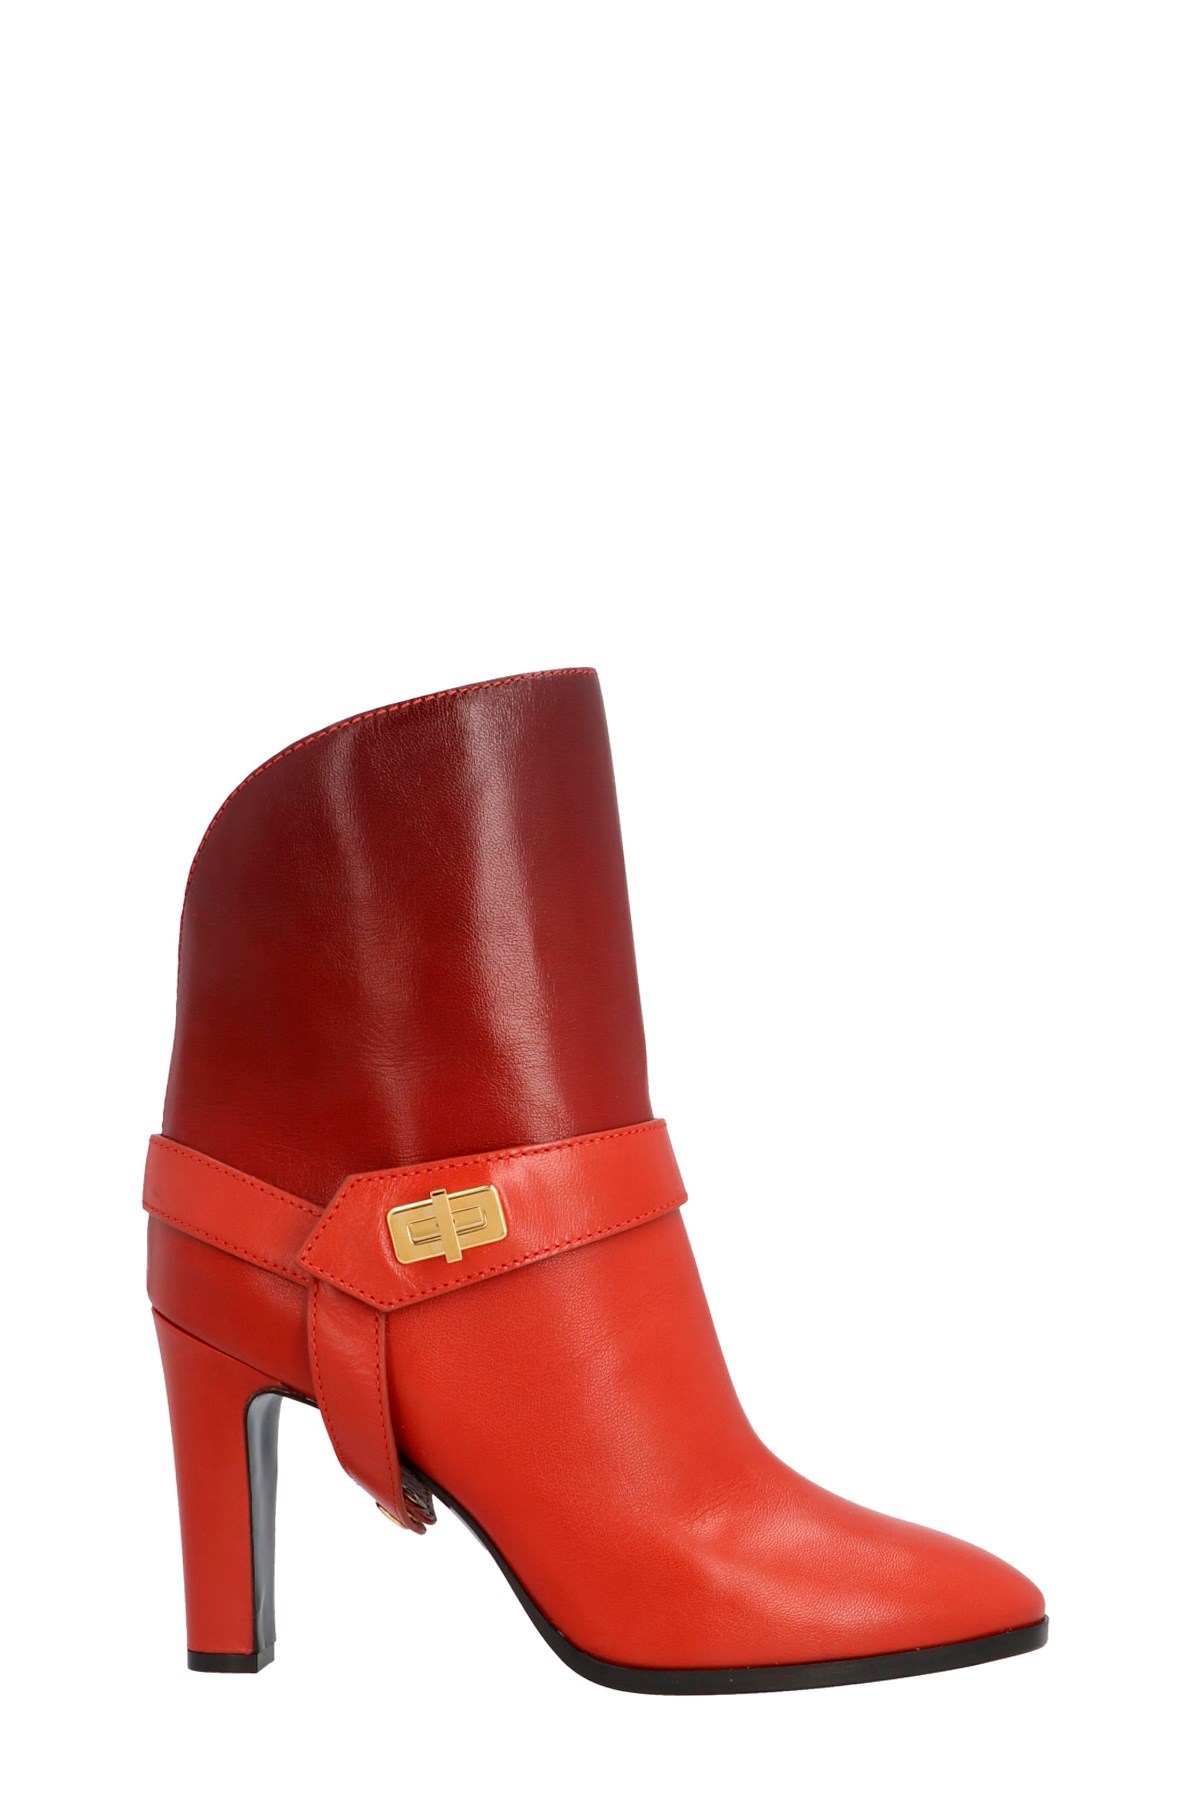 GIVENCHY 'Eden Degrade' Ankle Boots